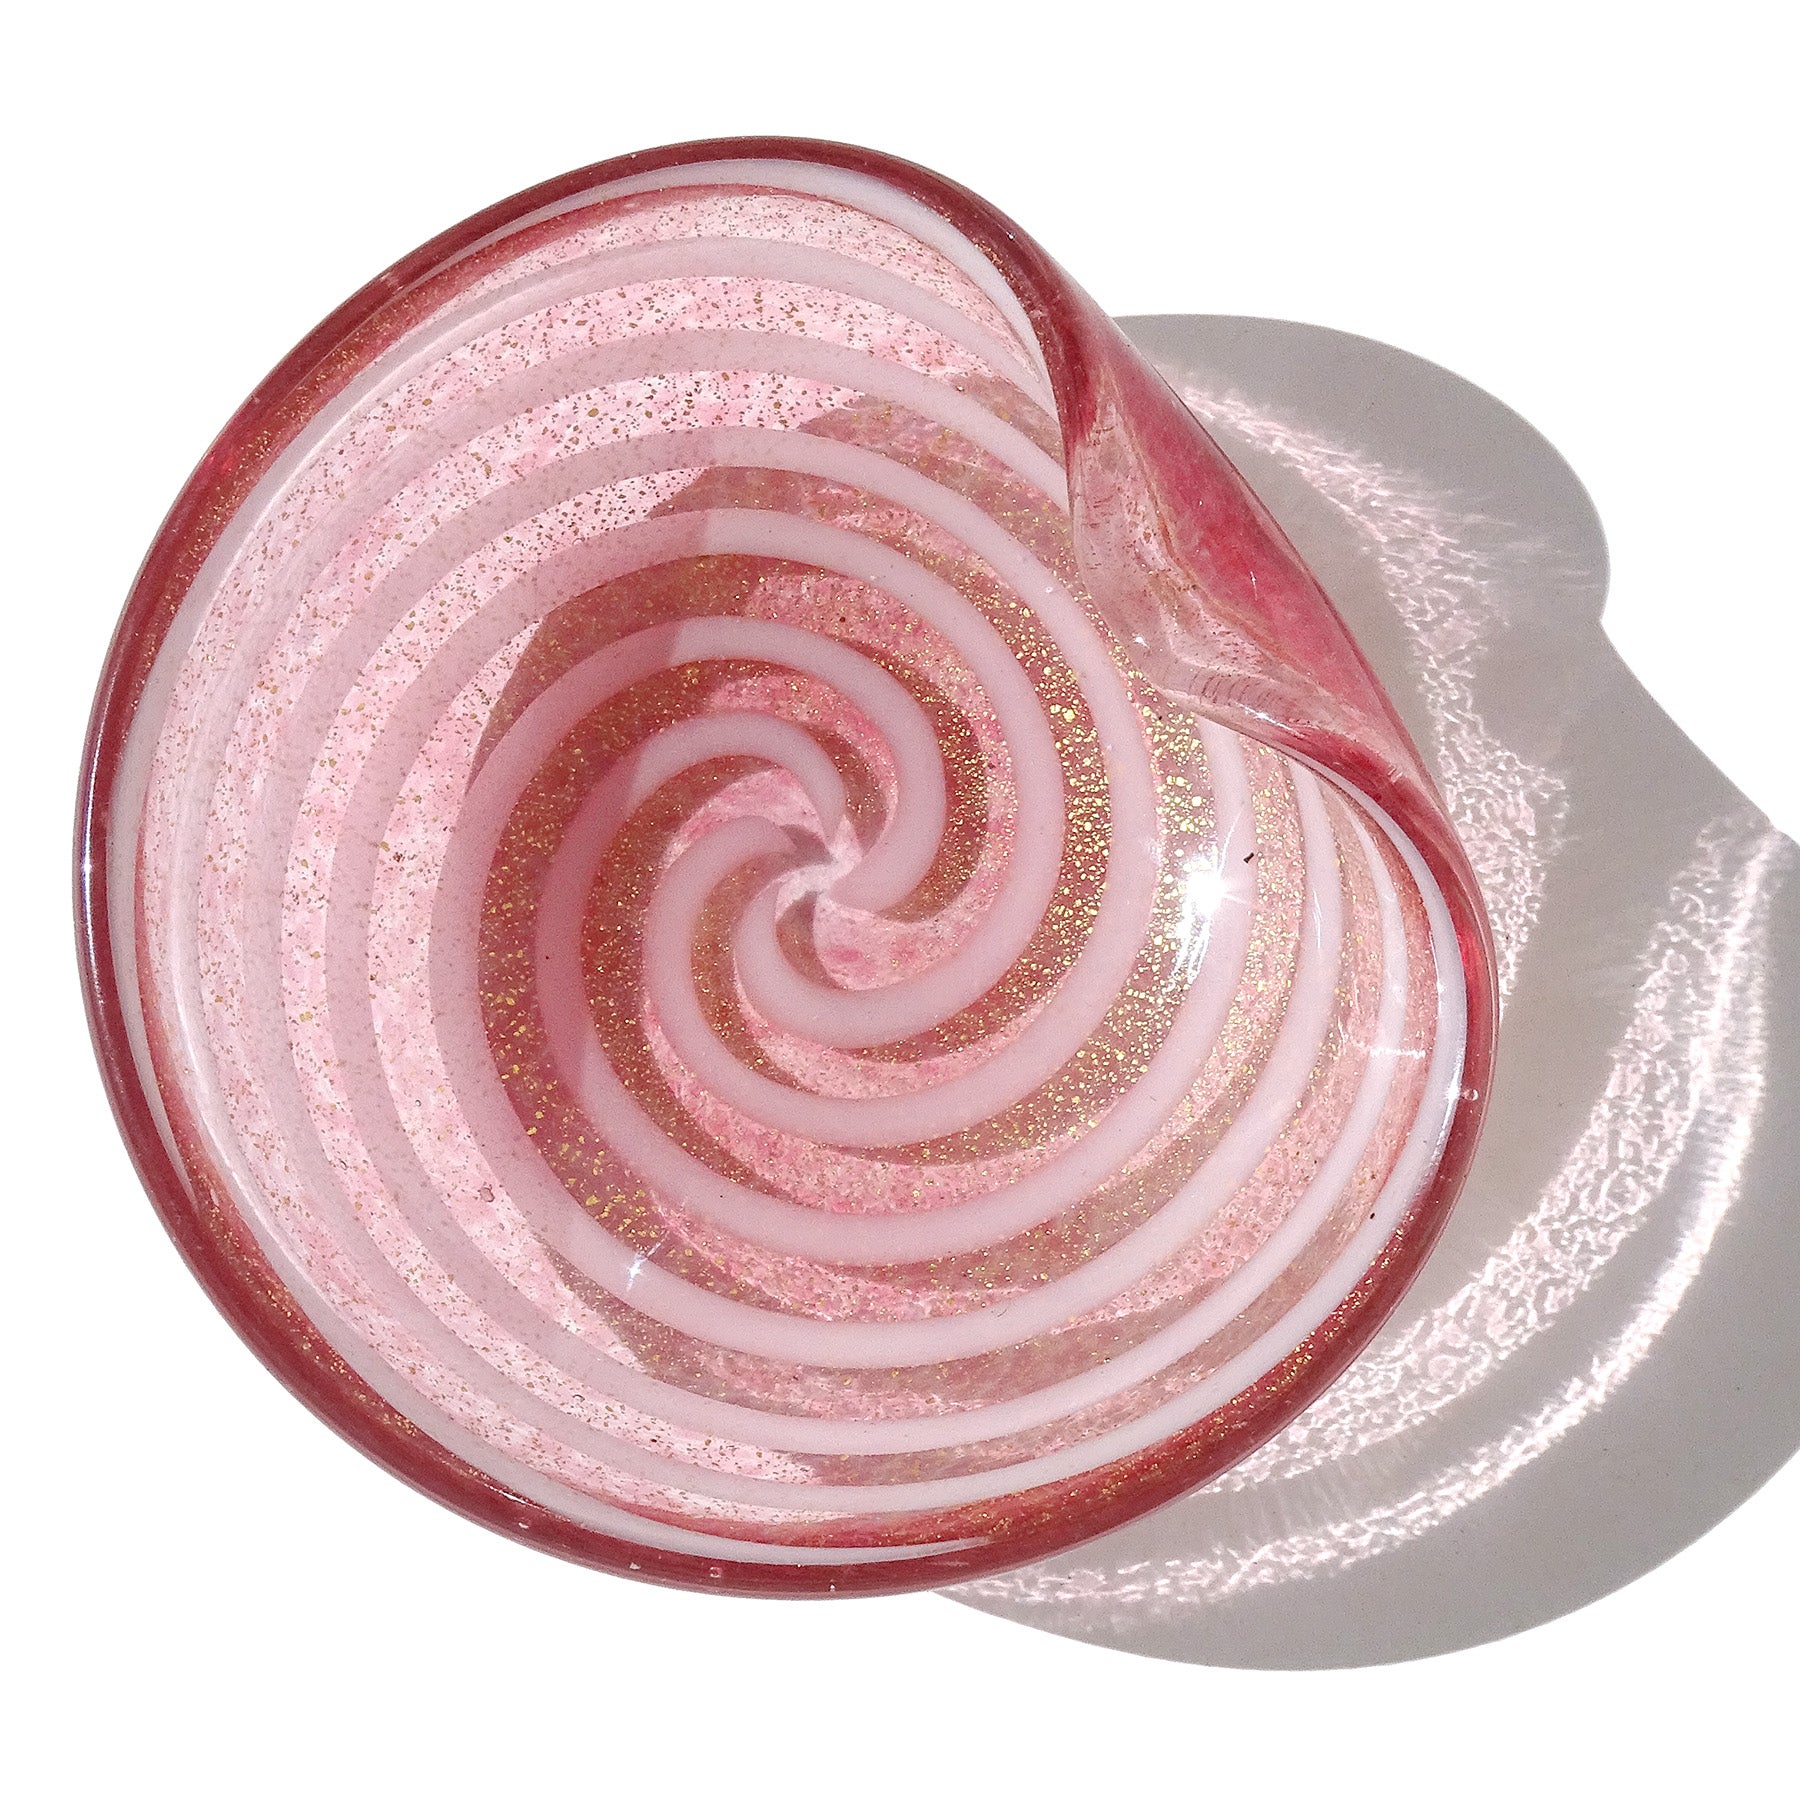 Beautiful vintage Murano hand blown pink, white and gold flecks Italian art glass bowl, vide-poche. Documented to designer Alfredo Barbini. The color is made with little dots of pink color. It has a white swirl design, and is filled with gold leaf